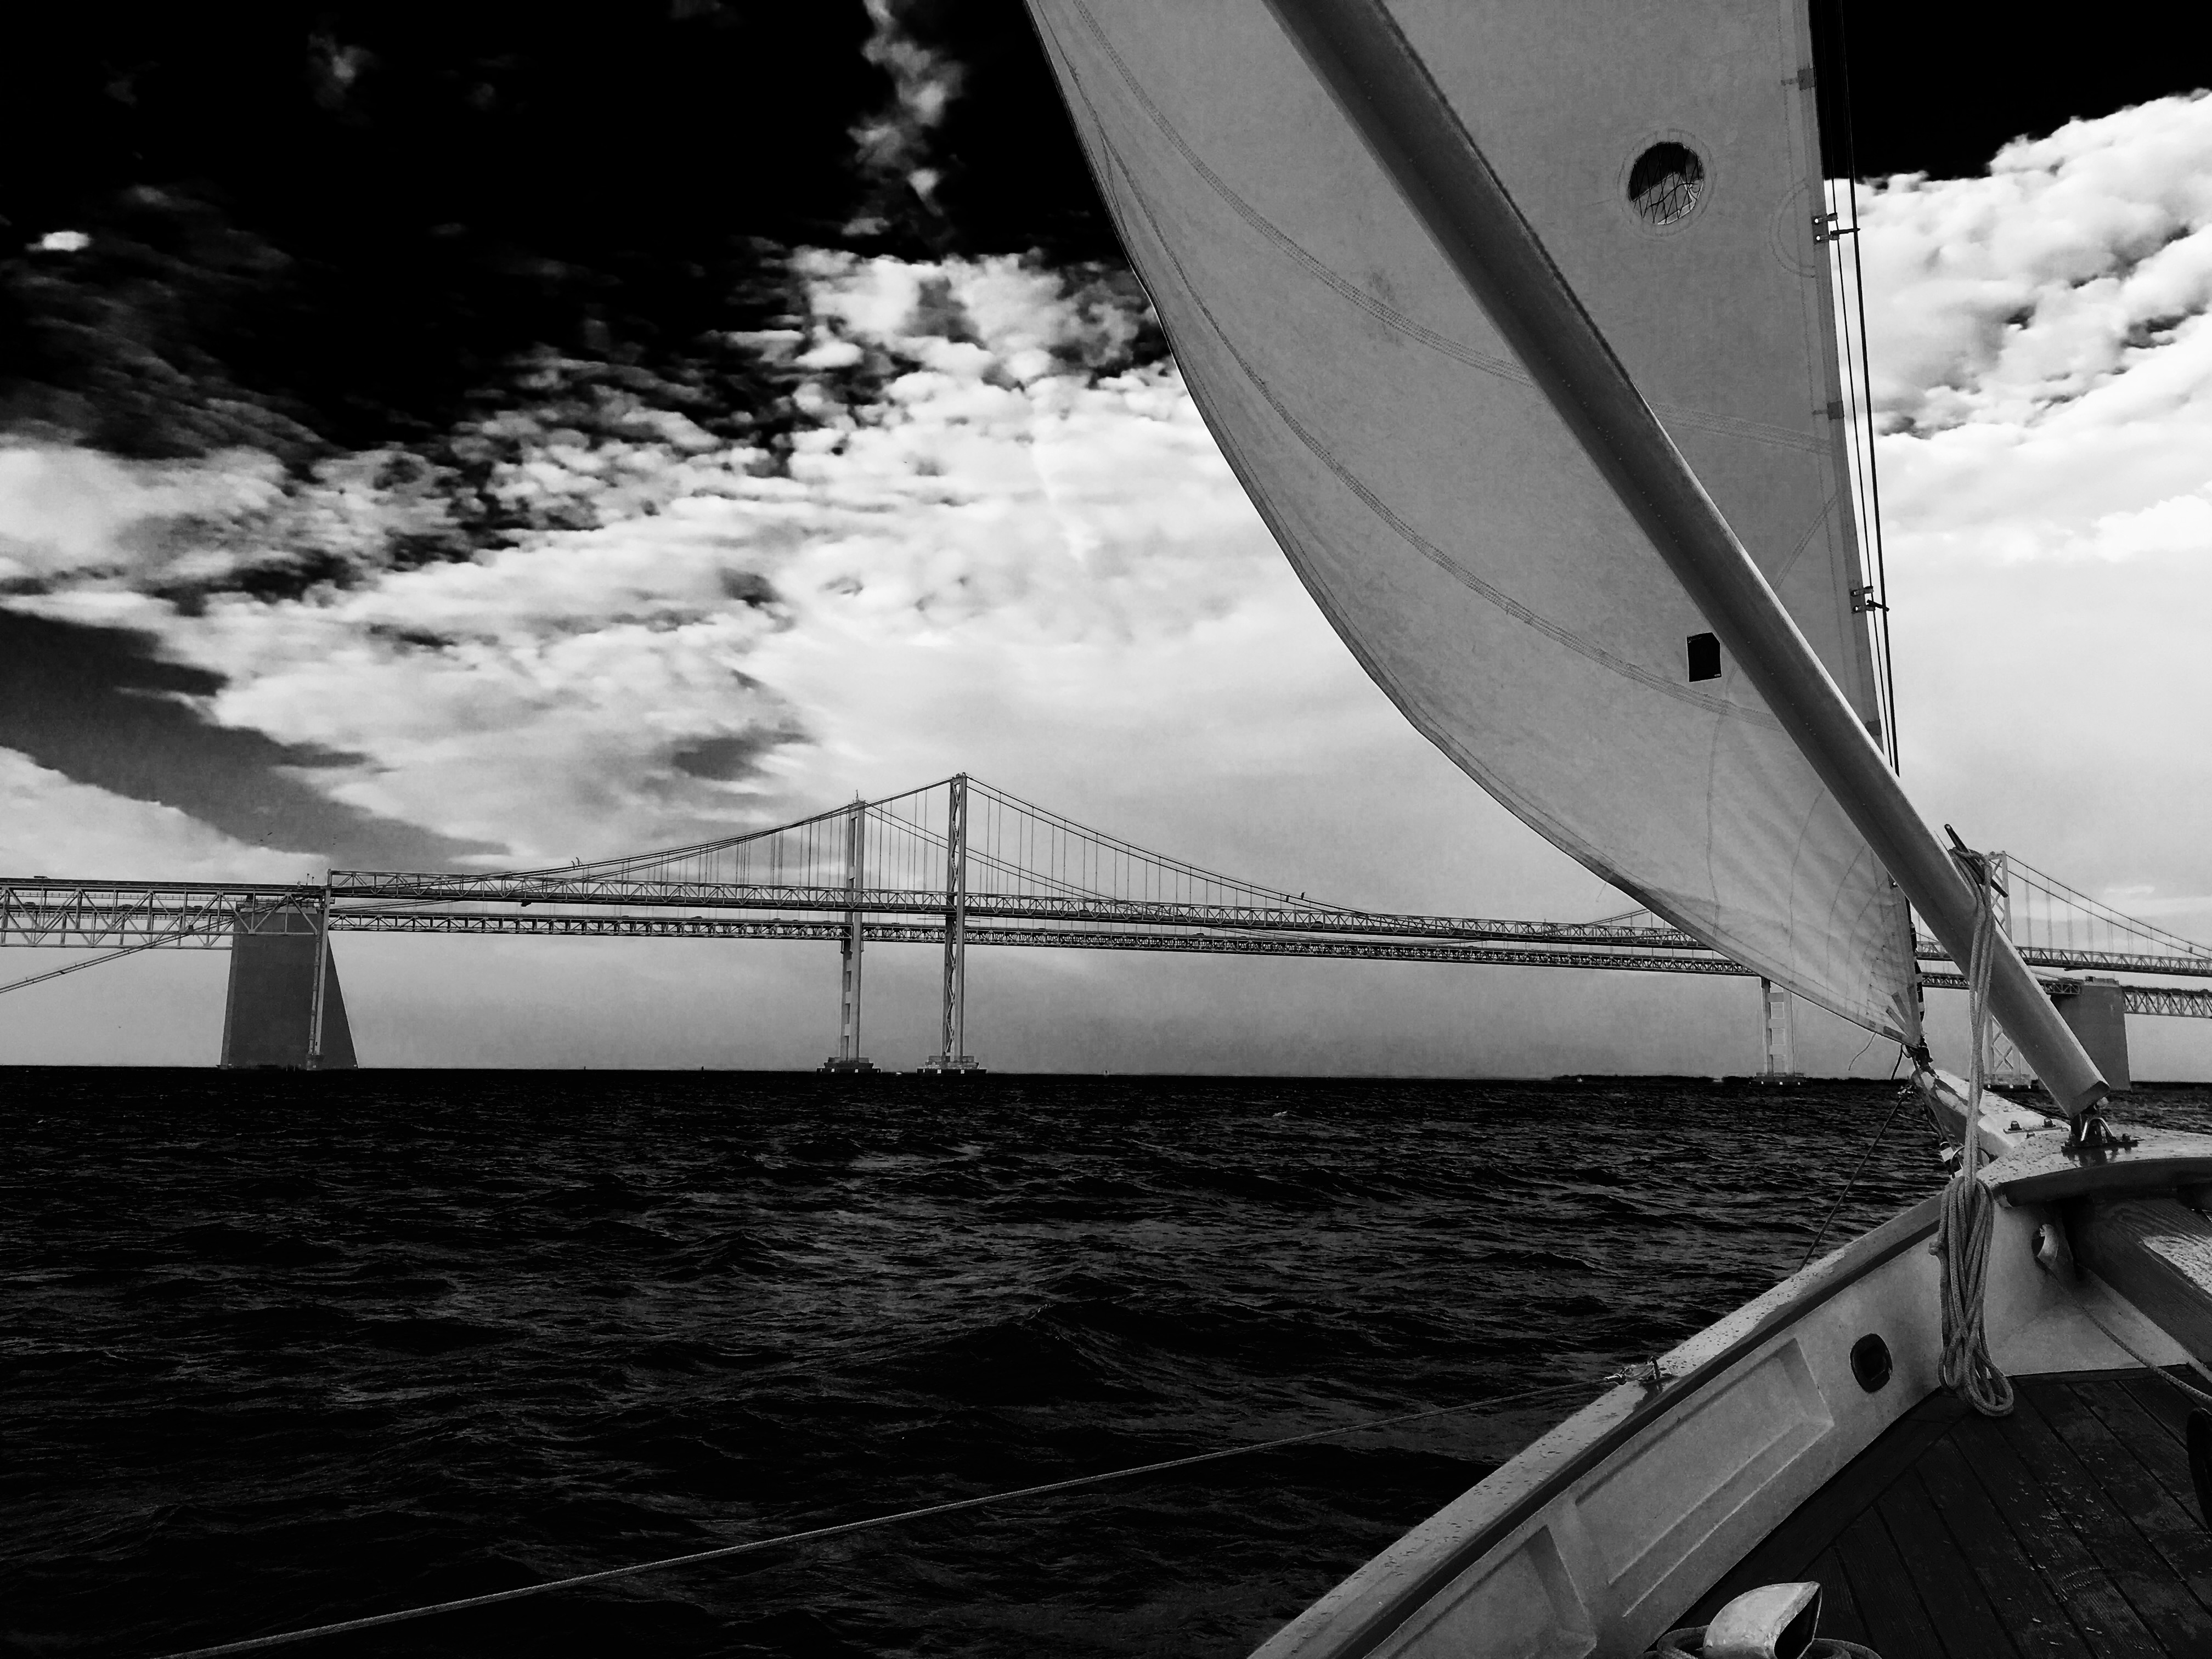 Black and white photo from stern of schooner with Bay Bridge